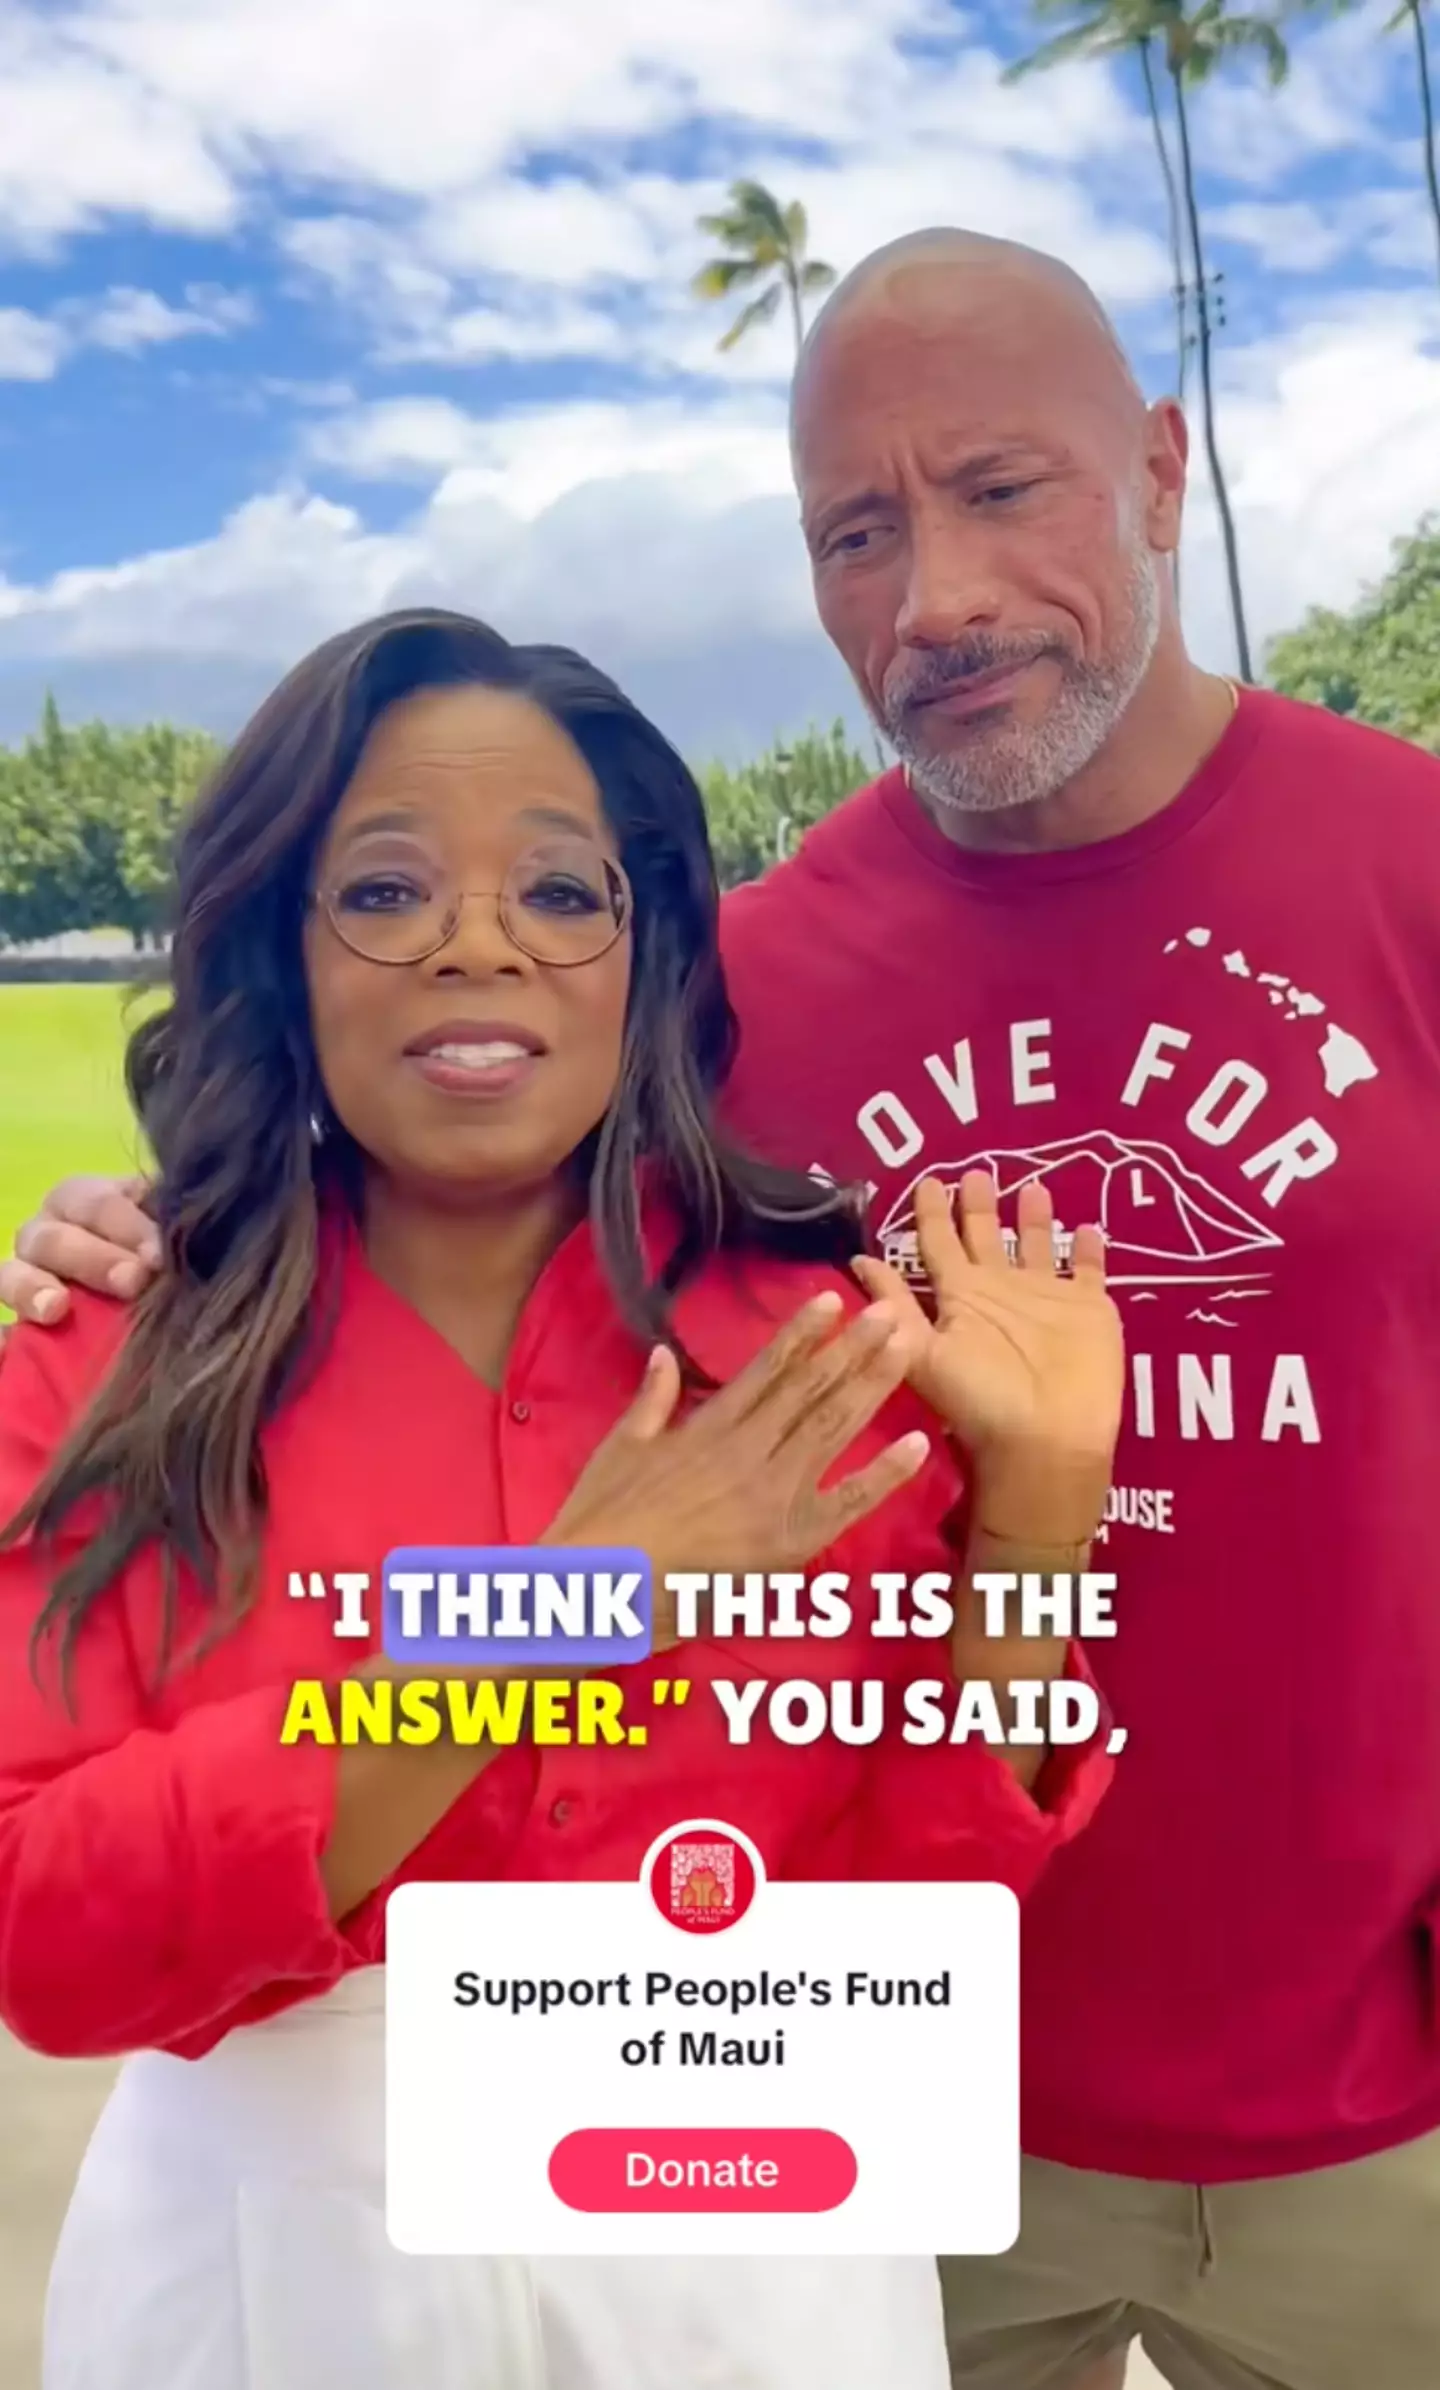 Oprah Winfrey has adressed the 'vitriol' backlash she and Dwayne Johnson have faced on social media.